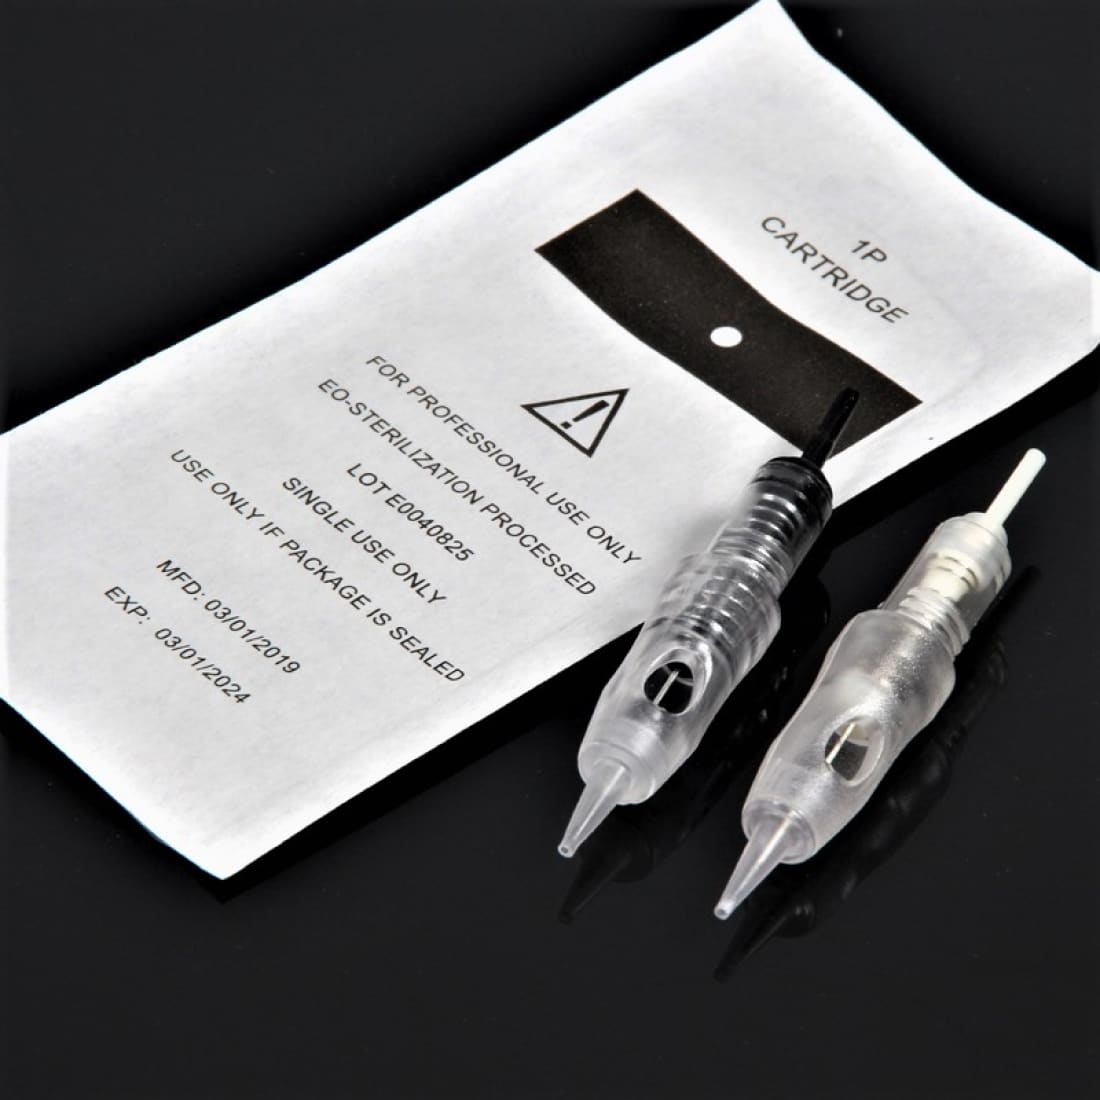 1RL Needle Cartridge with membrane, permanent makeup pen needle cartridge front view with package